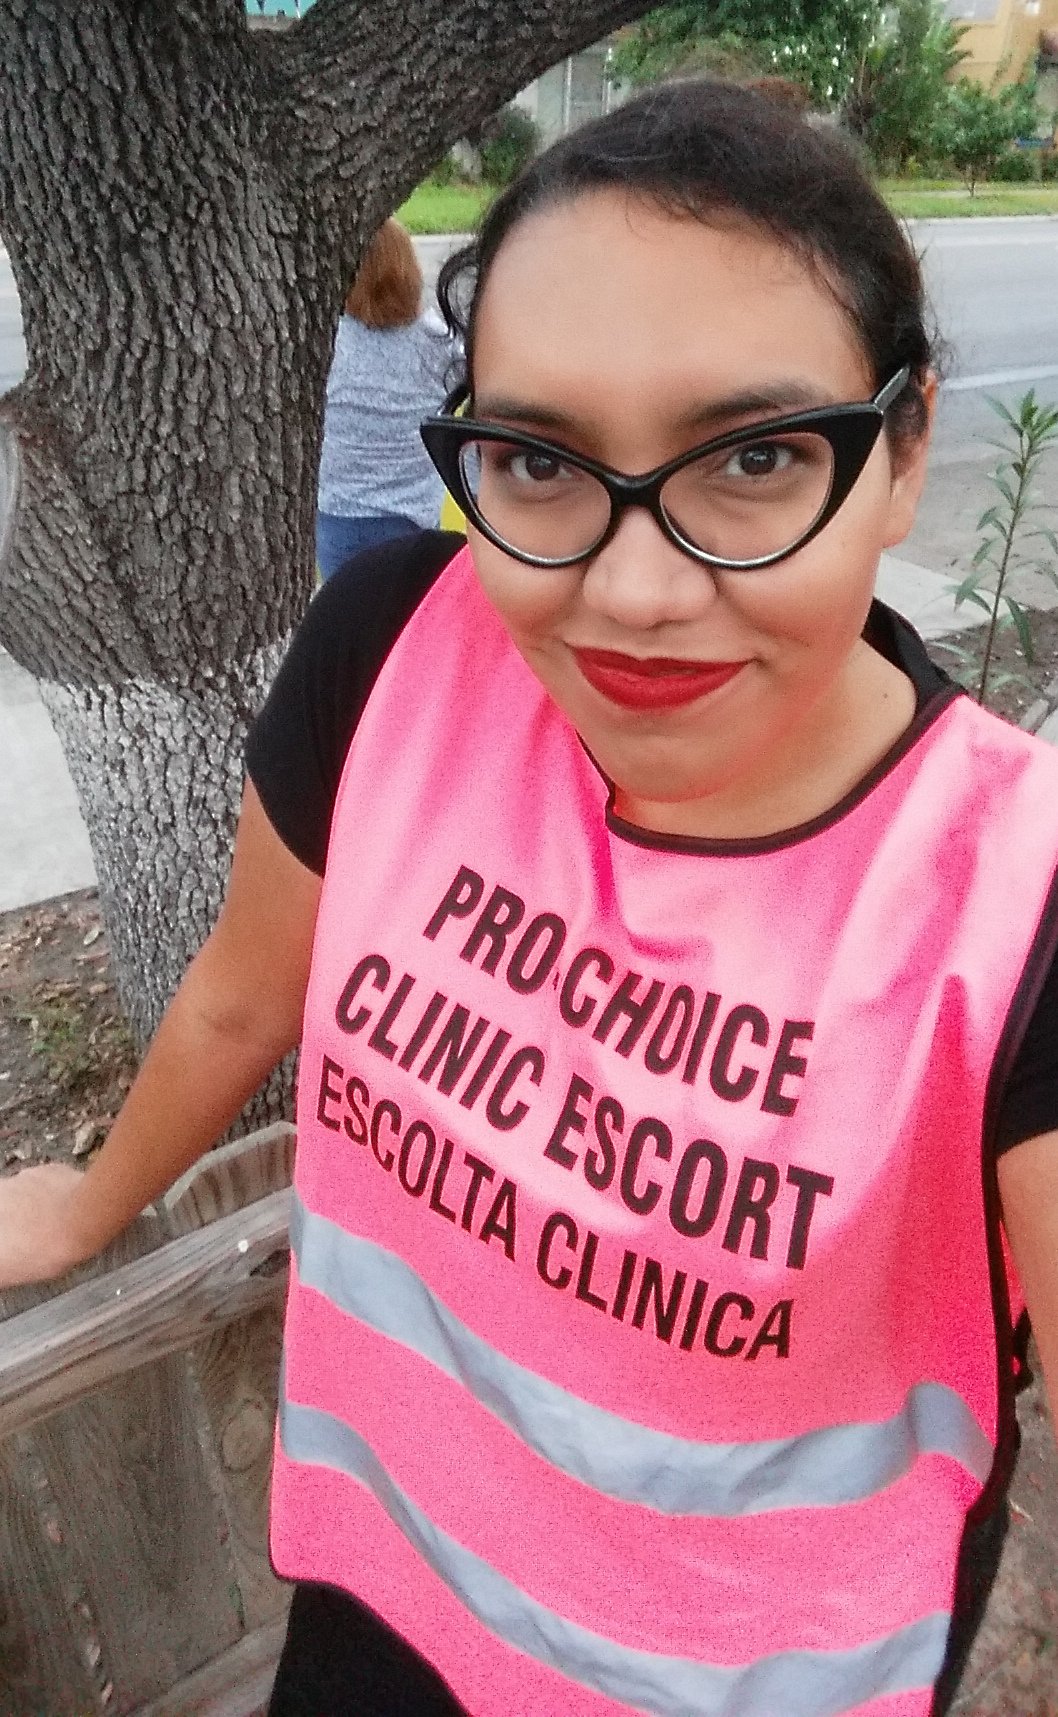 Melissa Arjona wears a pink vest that reads "Pro-choice clinic escort" and "Escolta clinica."